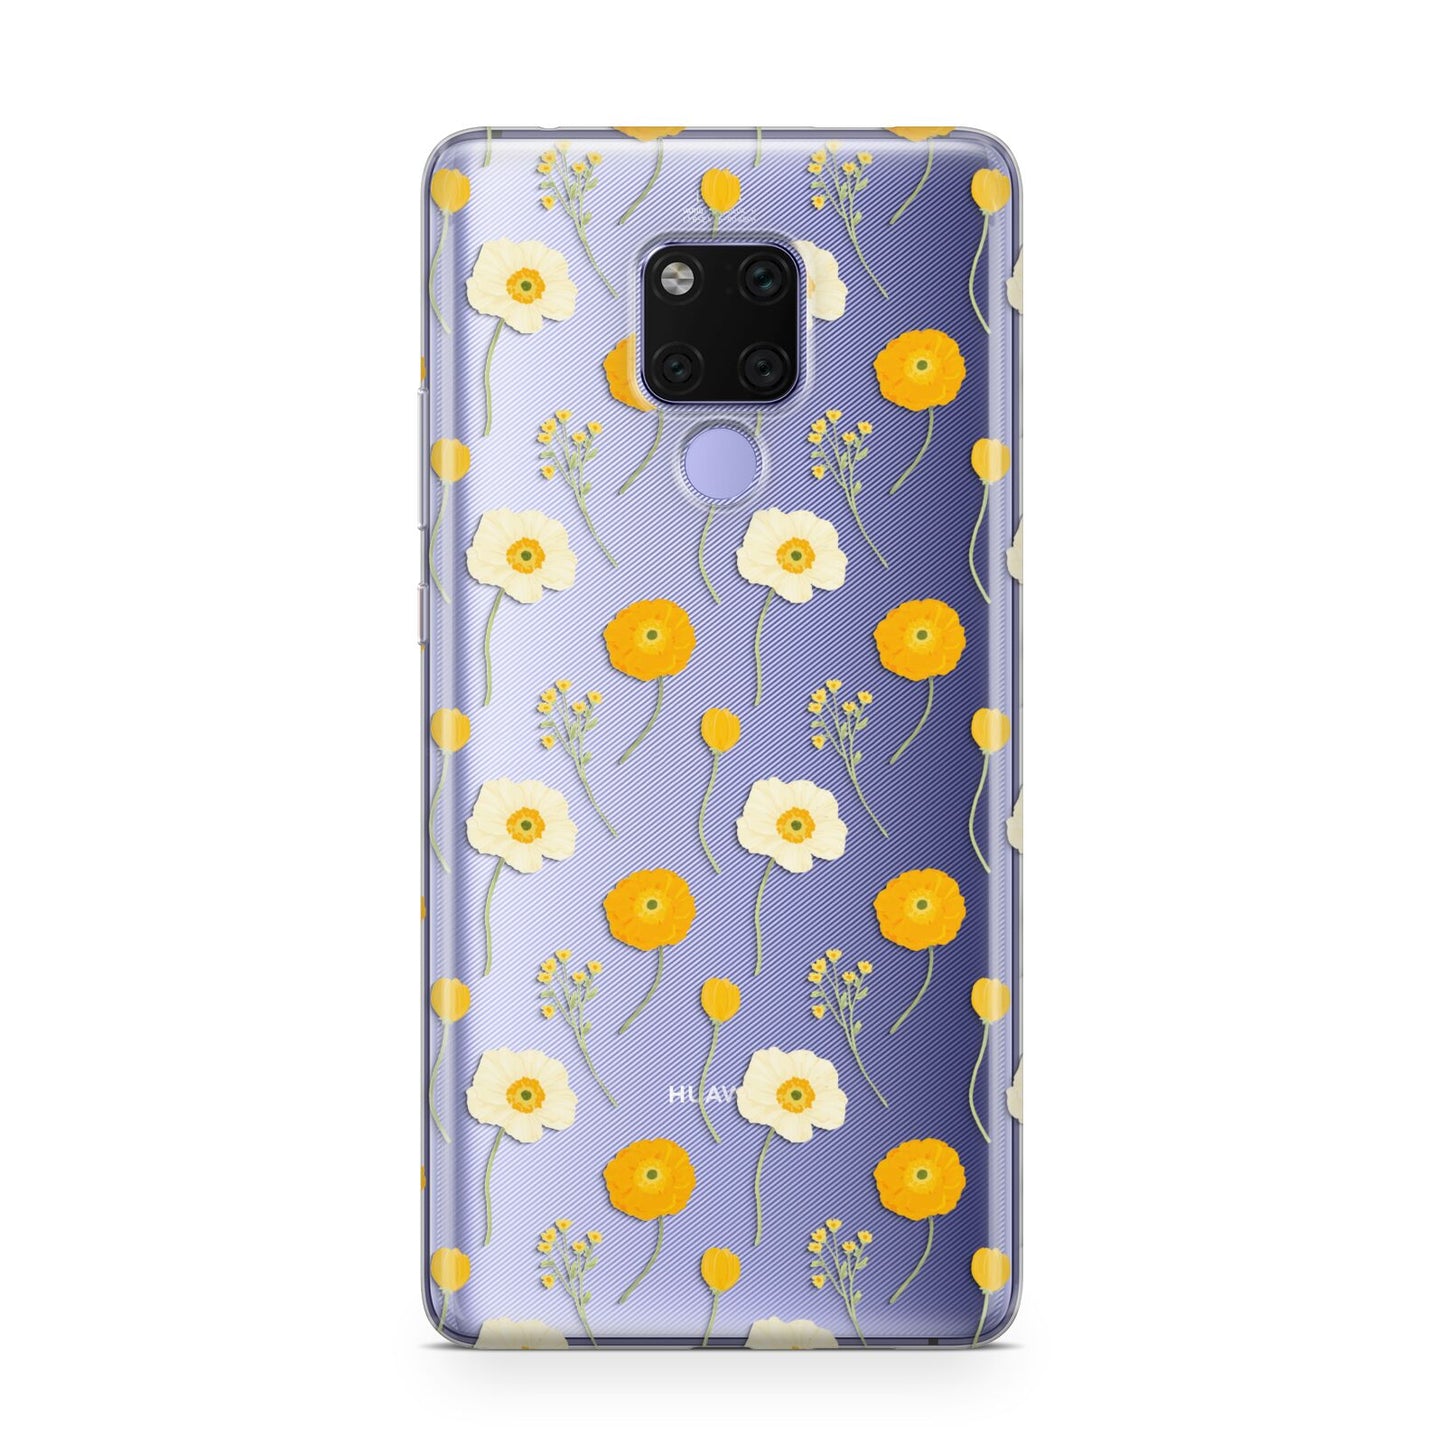 Wild Floral Huawei Mate 20X Phone Case